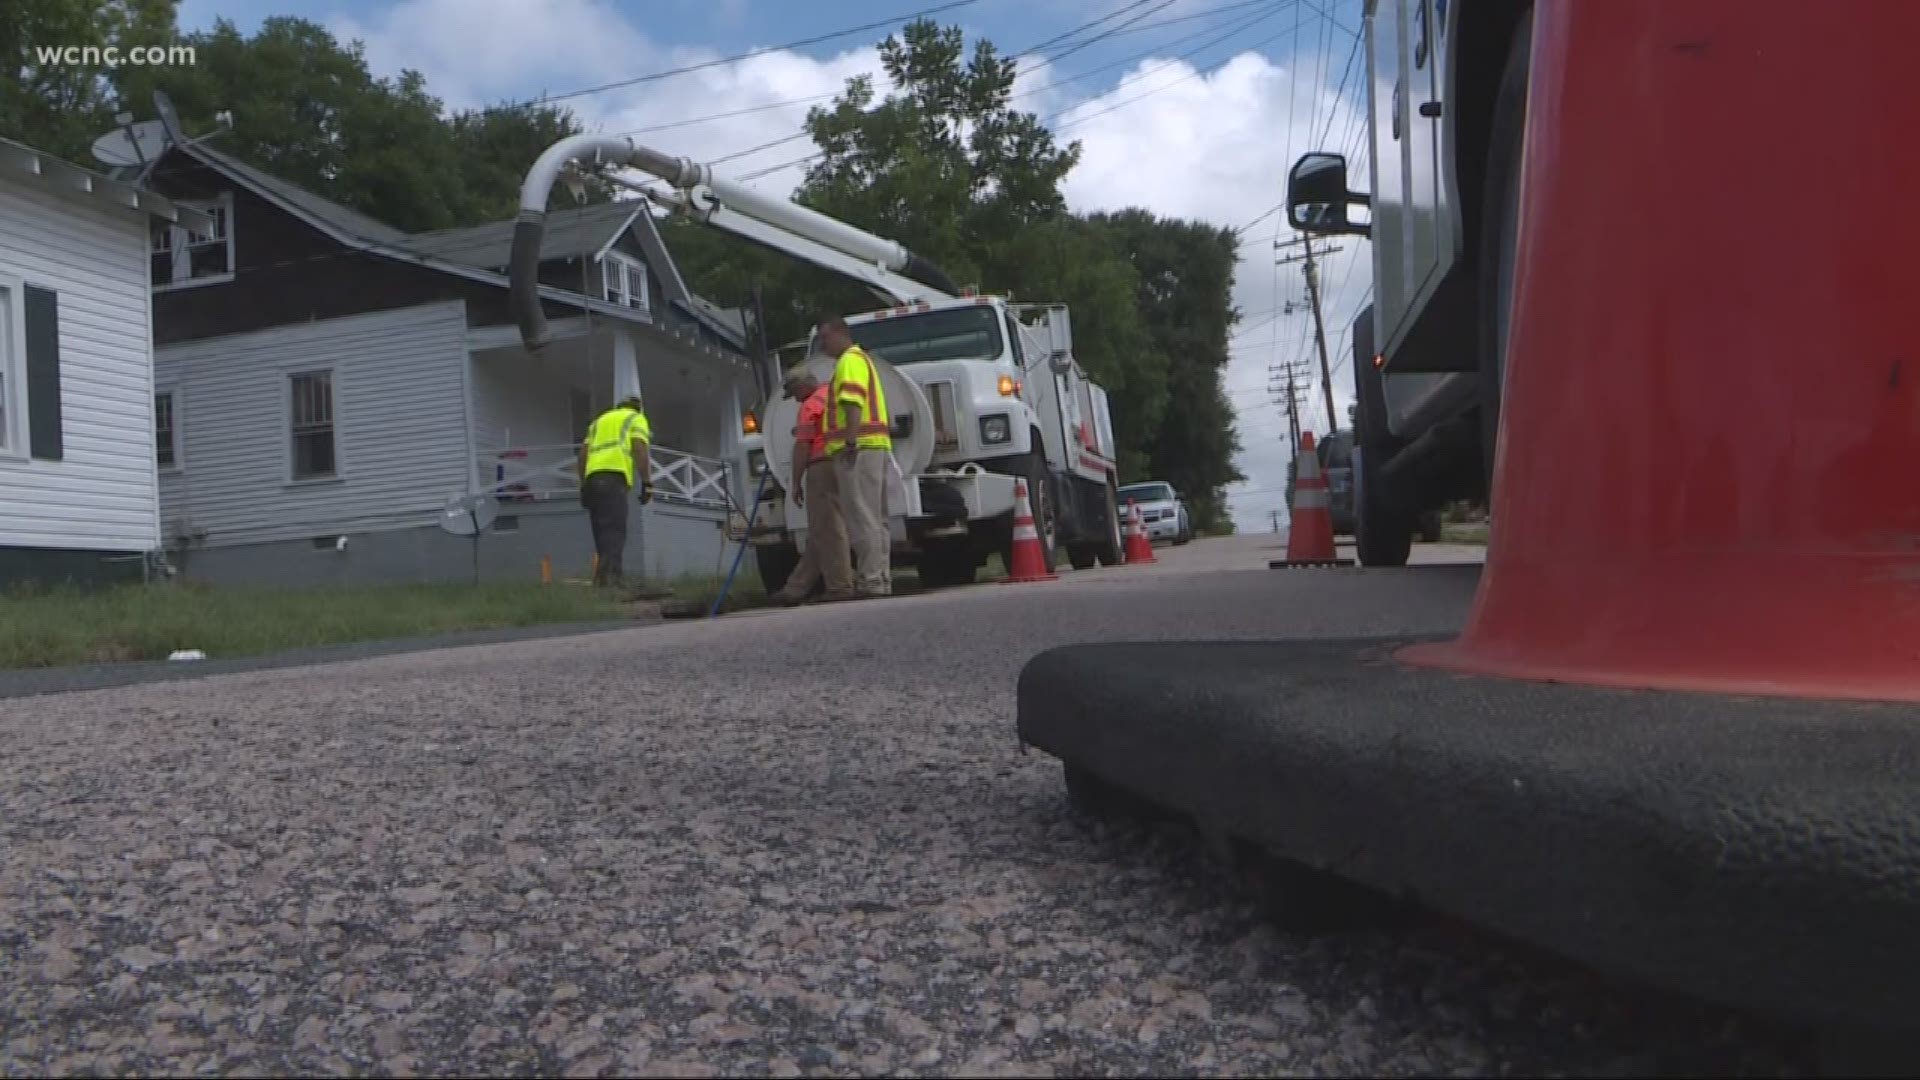 Officials in Rowan County are preparing for possibly dangerous flooding that Hurricane Florence is expected to bring to the area.